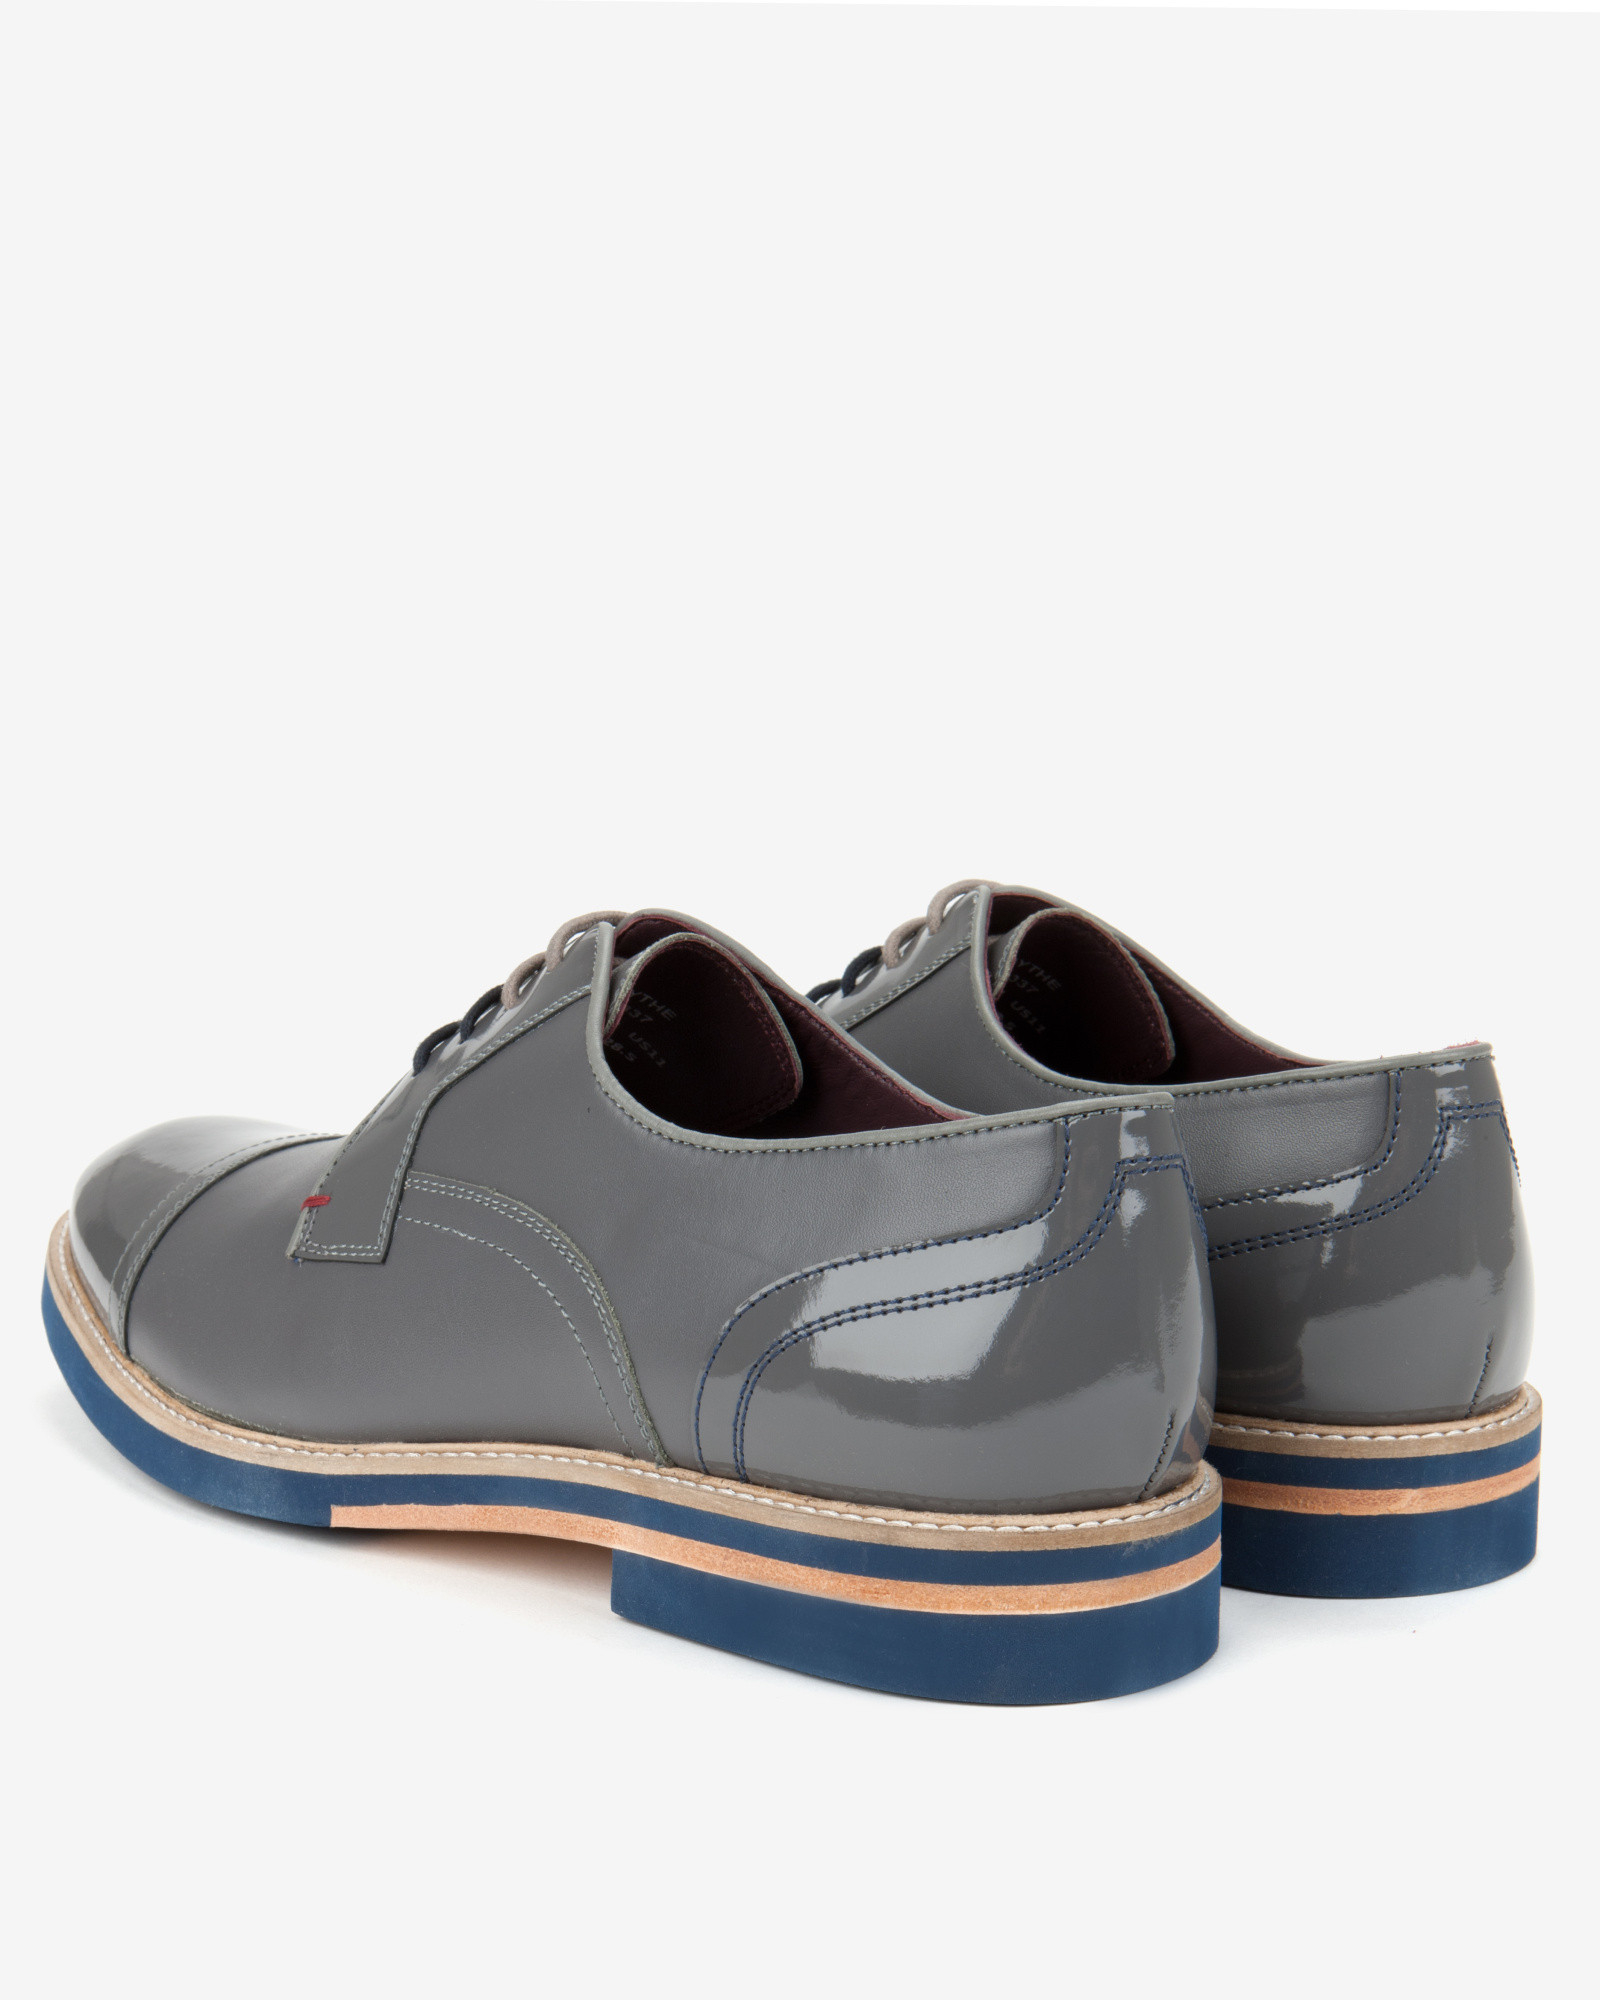 Ted Baker Textured Leather Derby Shoes in Gray for Men - Lyst